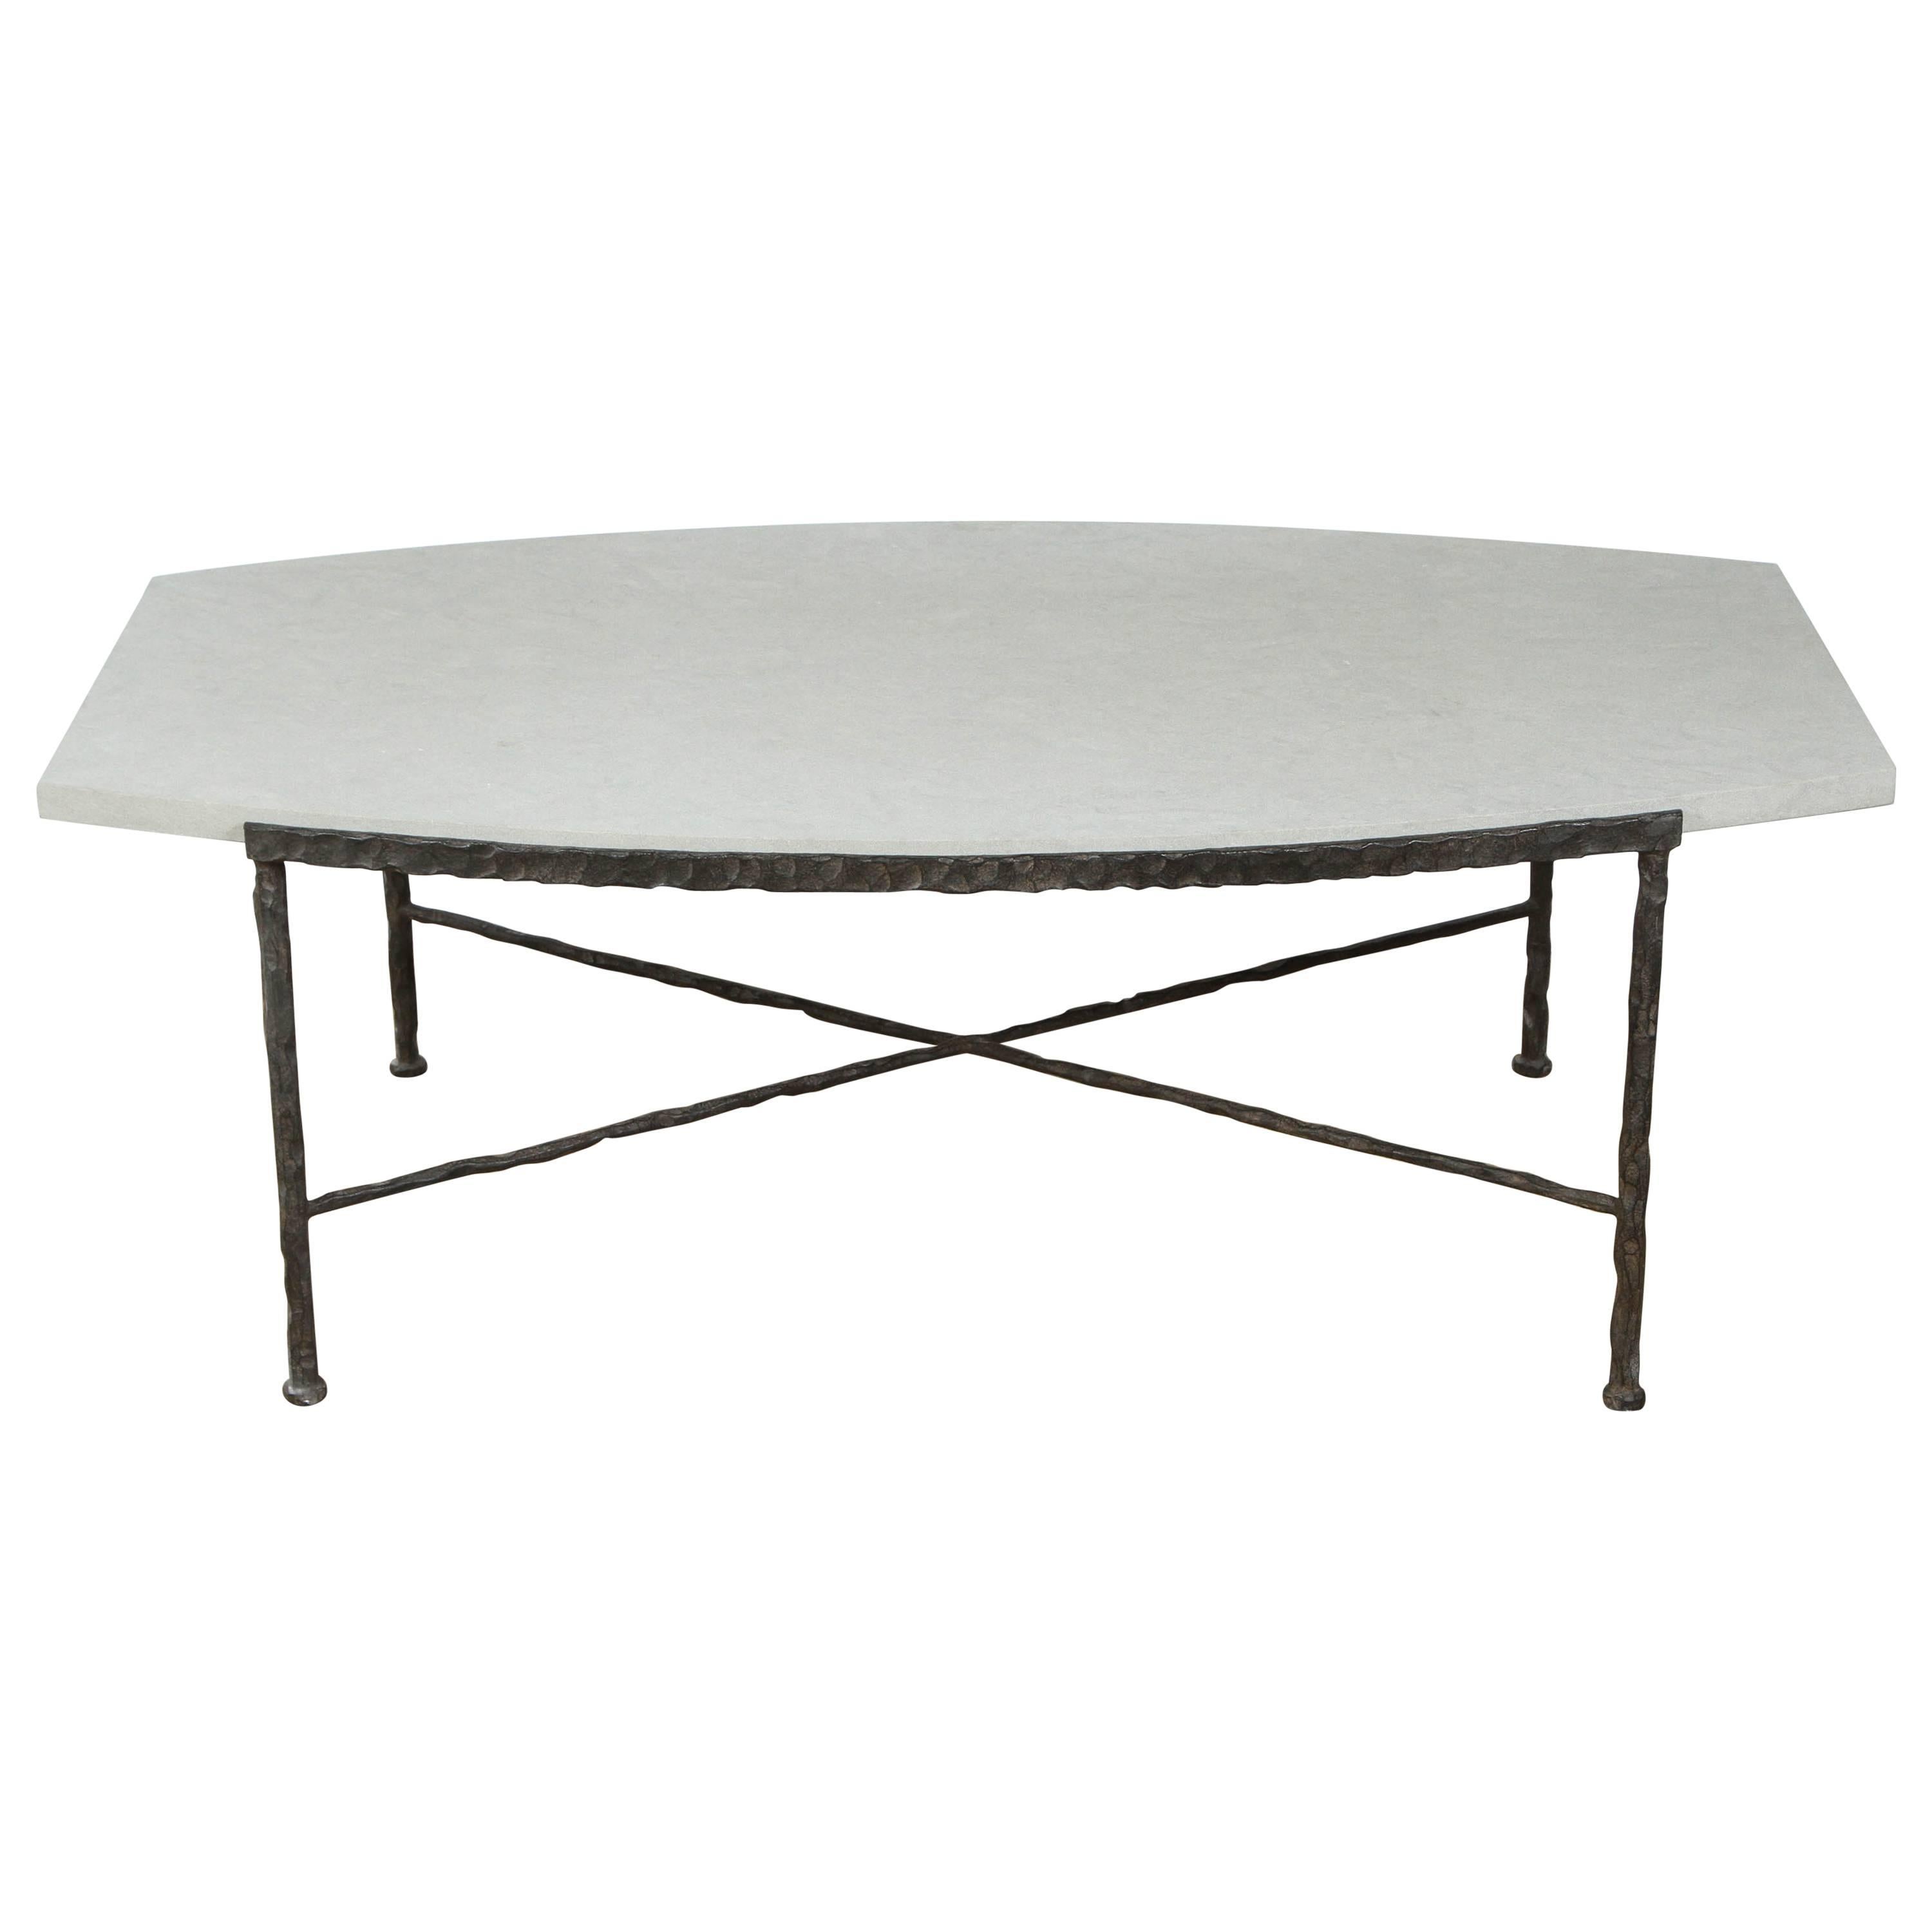 Paul Marra Ellipse Cocktail Table in Textured Iron and Bateig Blue Stone For Sale